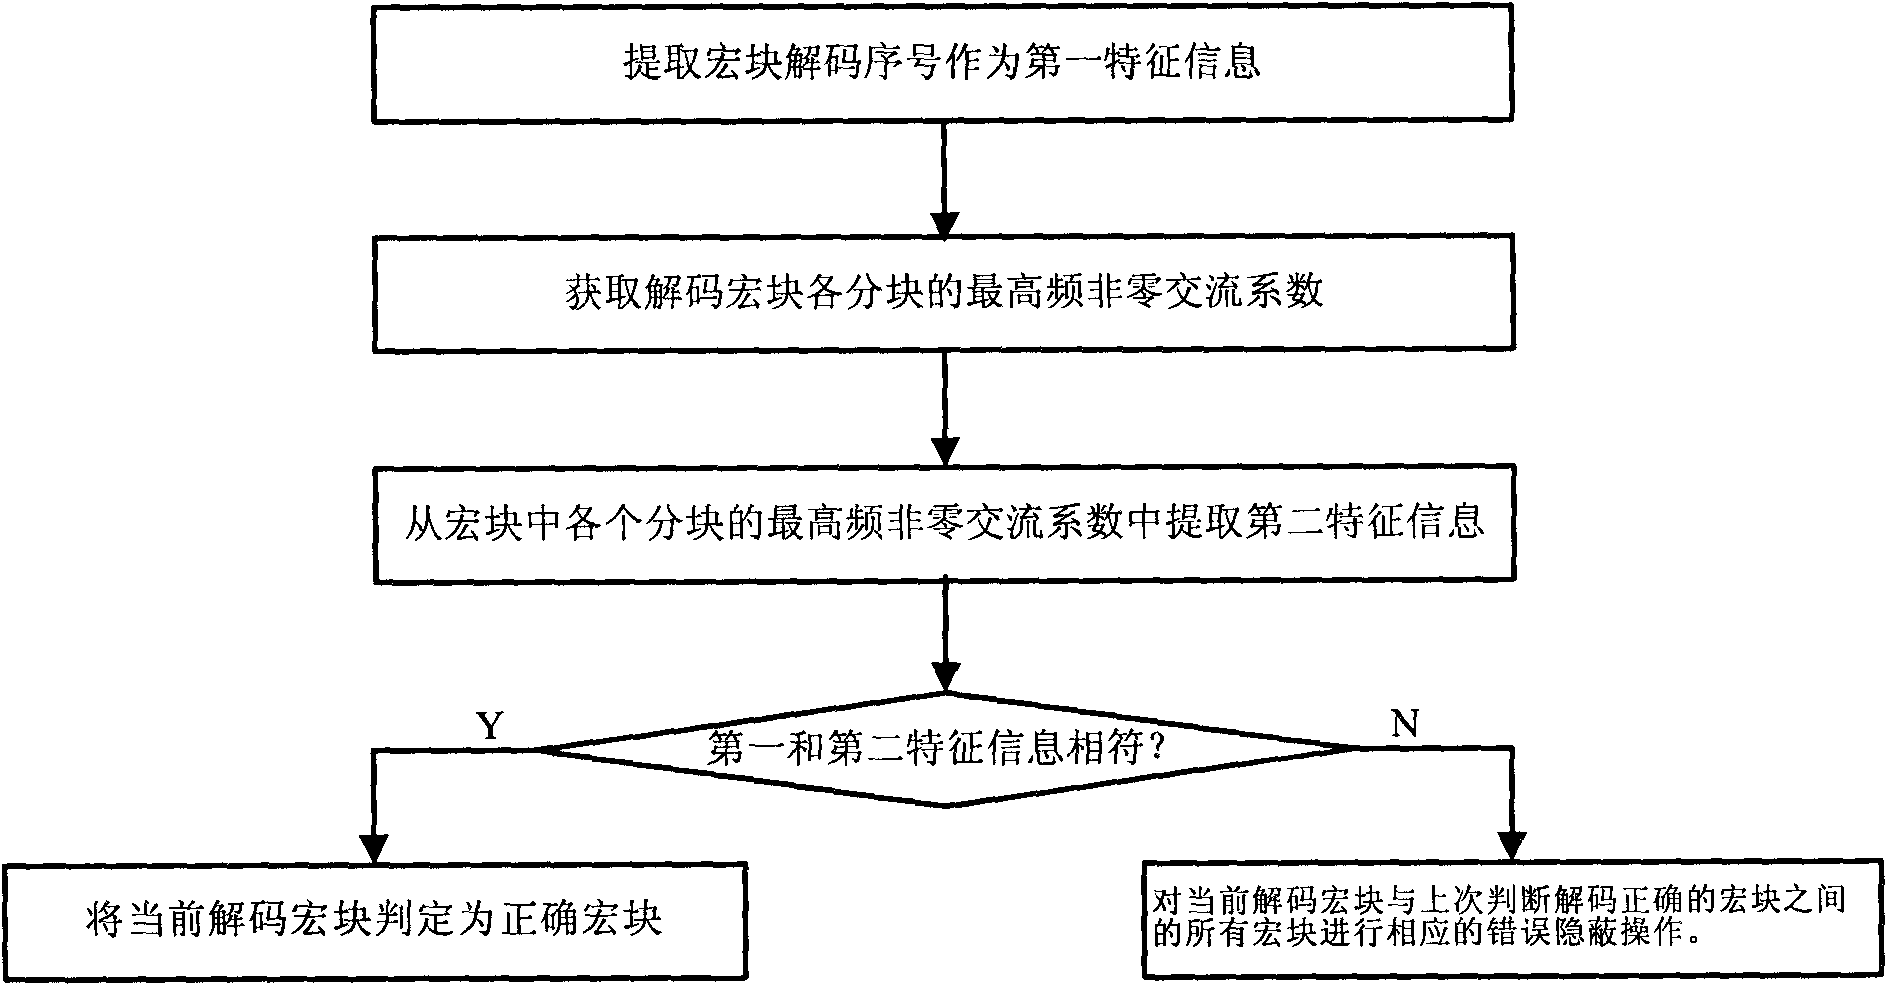 Method and device for labelling characteristic information of video code stream and method and device for detecting characteristic information of video code stream